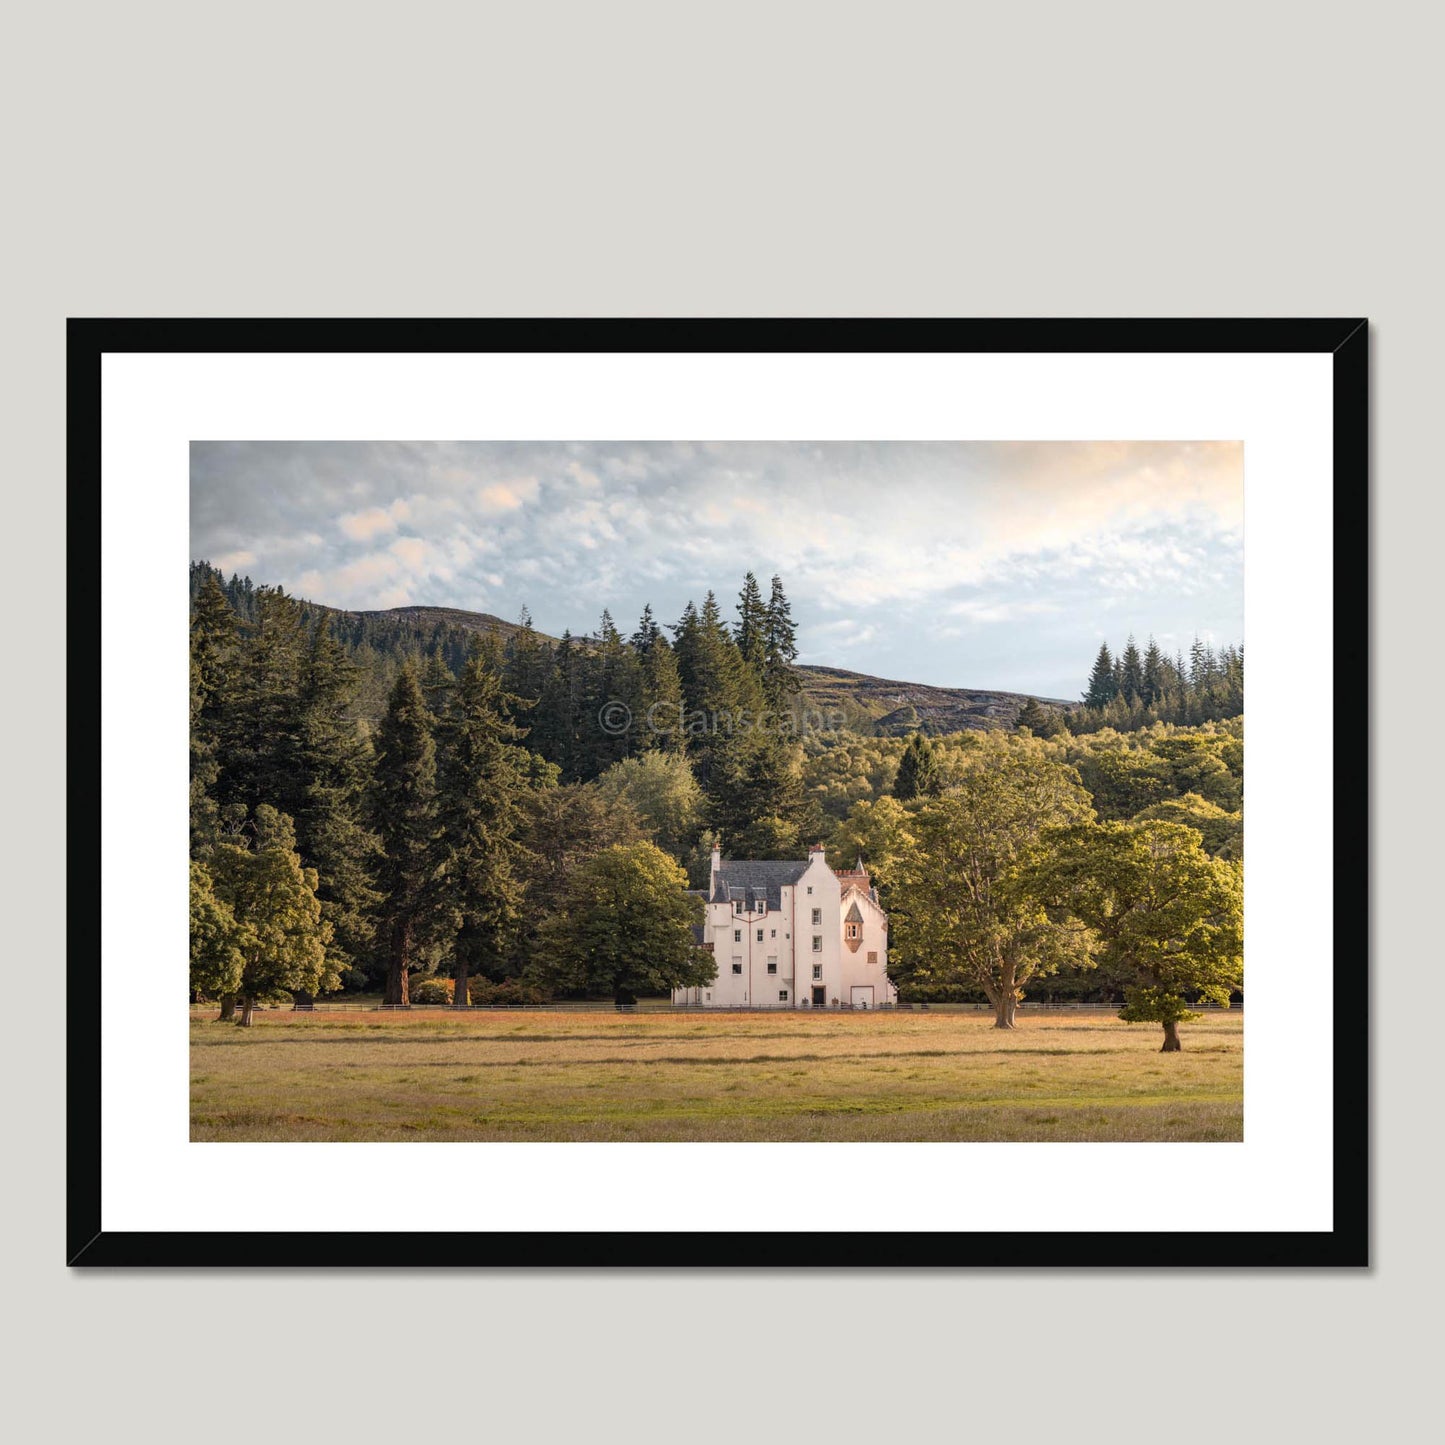 Clan Chisholm - Erchless Castle - Framed & Mounted Photo Print 28"x20" Black